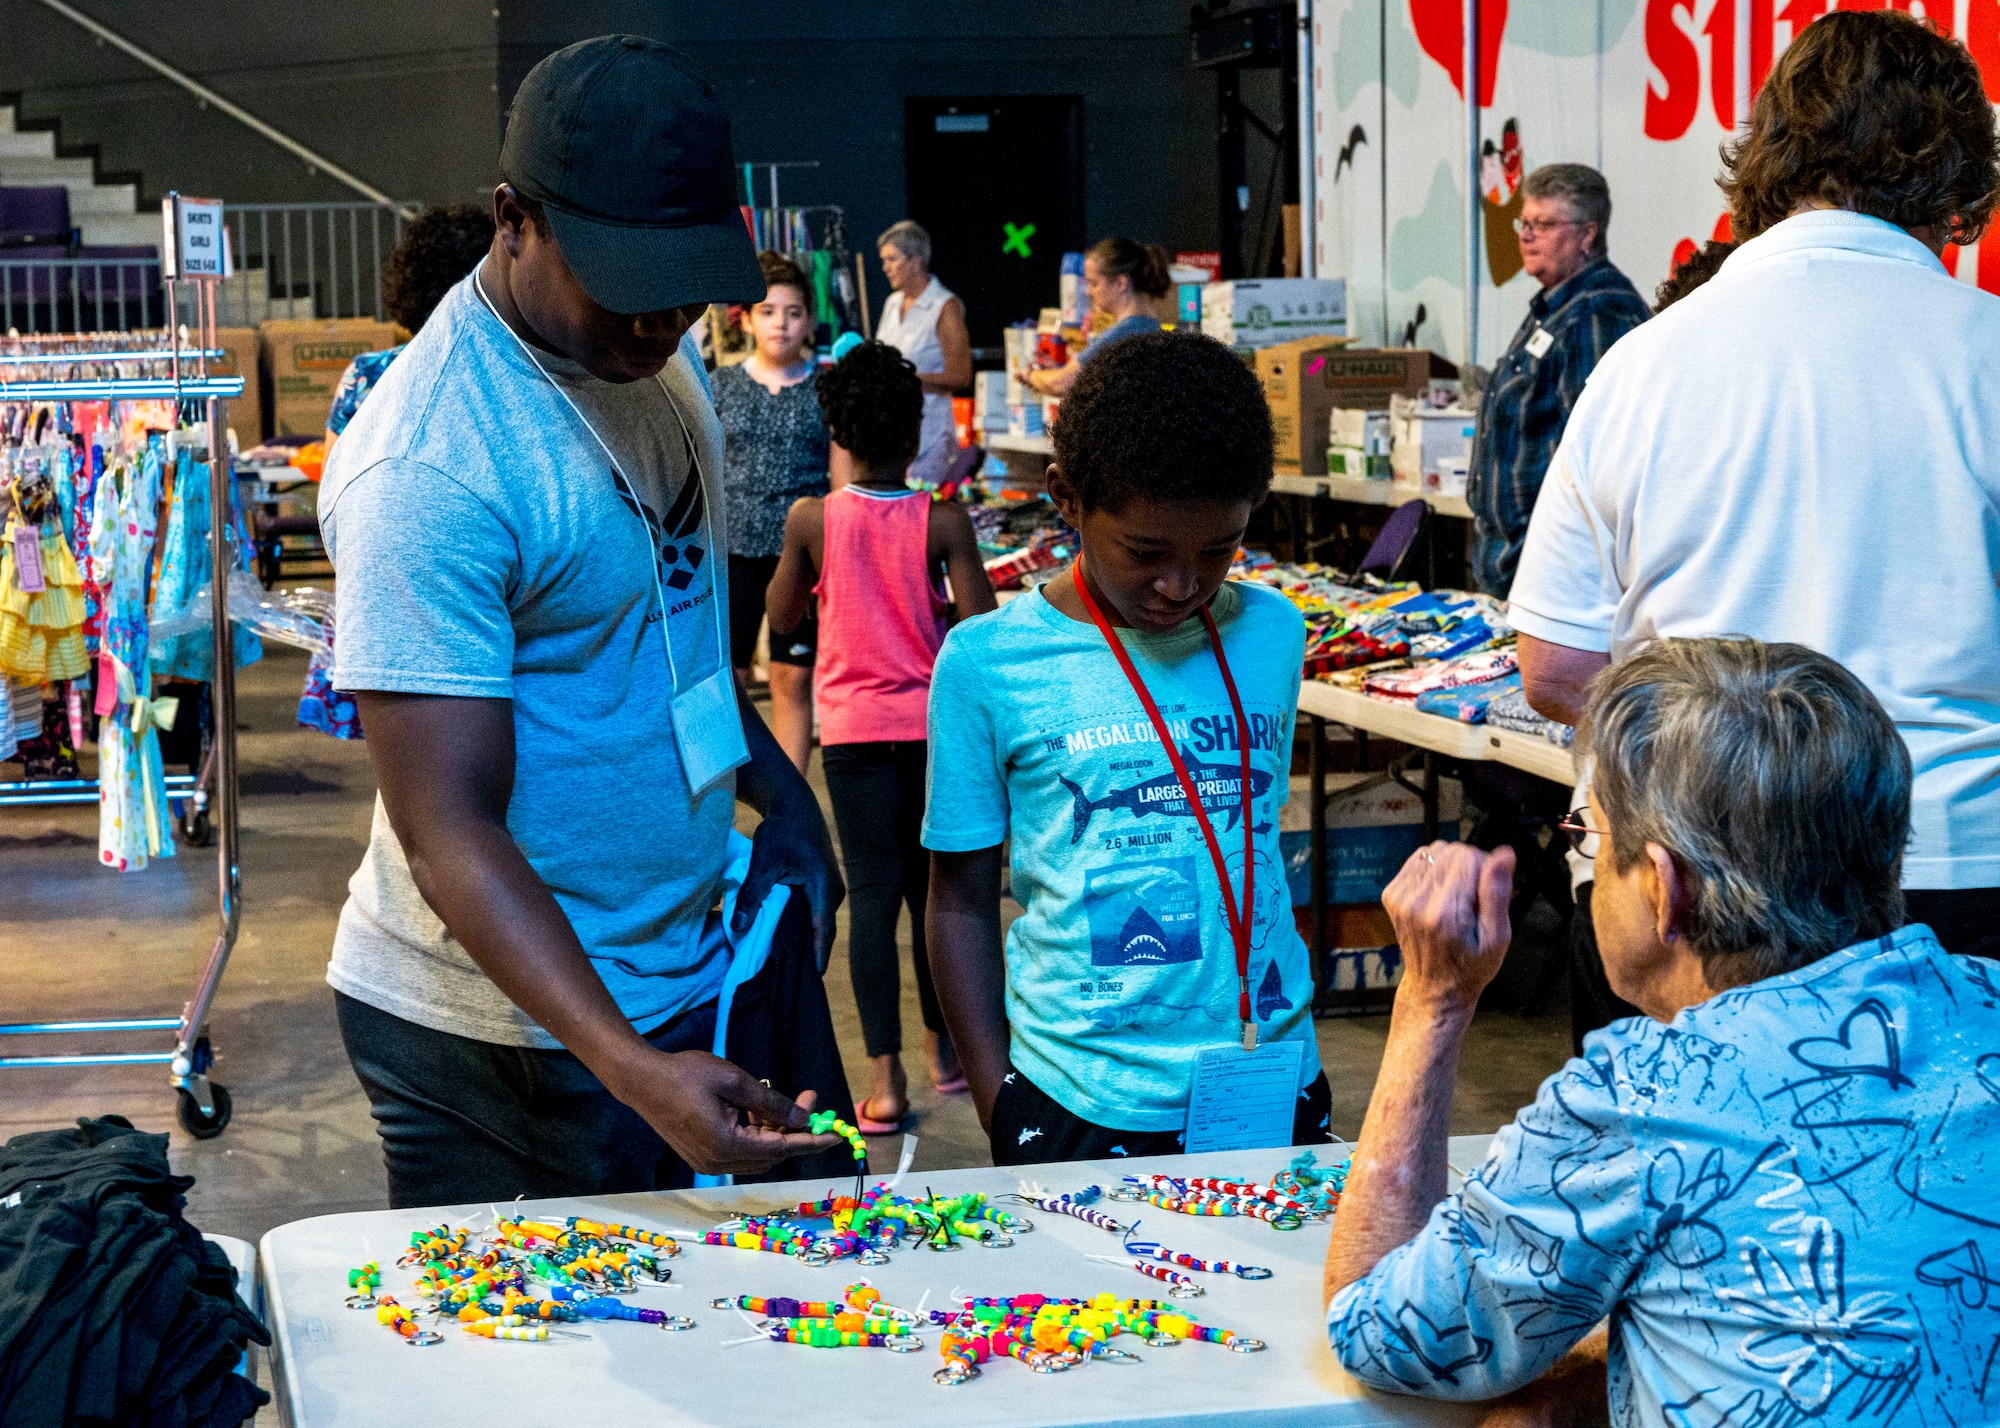 U.S. Air Force Airman 1st Class Kouame Koffi, 56th Logistics Readiness Squadron fleet management and analysis journeyman, helps a student pick out supplies and other items at the Back to School Bash event July 20, 2022, at Grand Canyon University, Phoenix, Arizona.